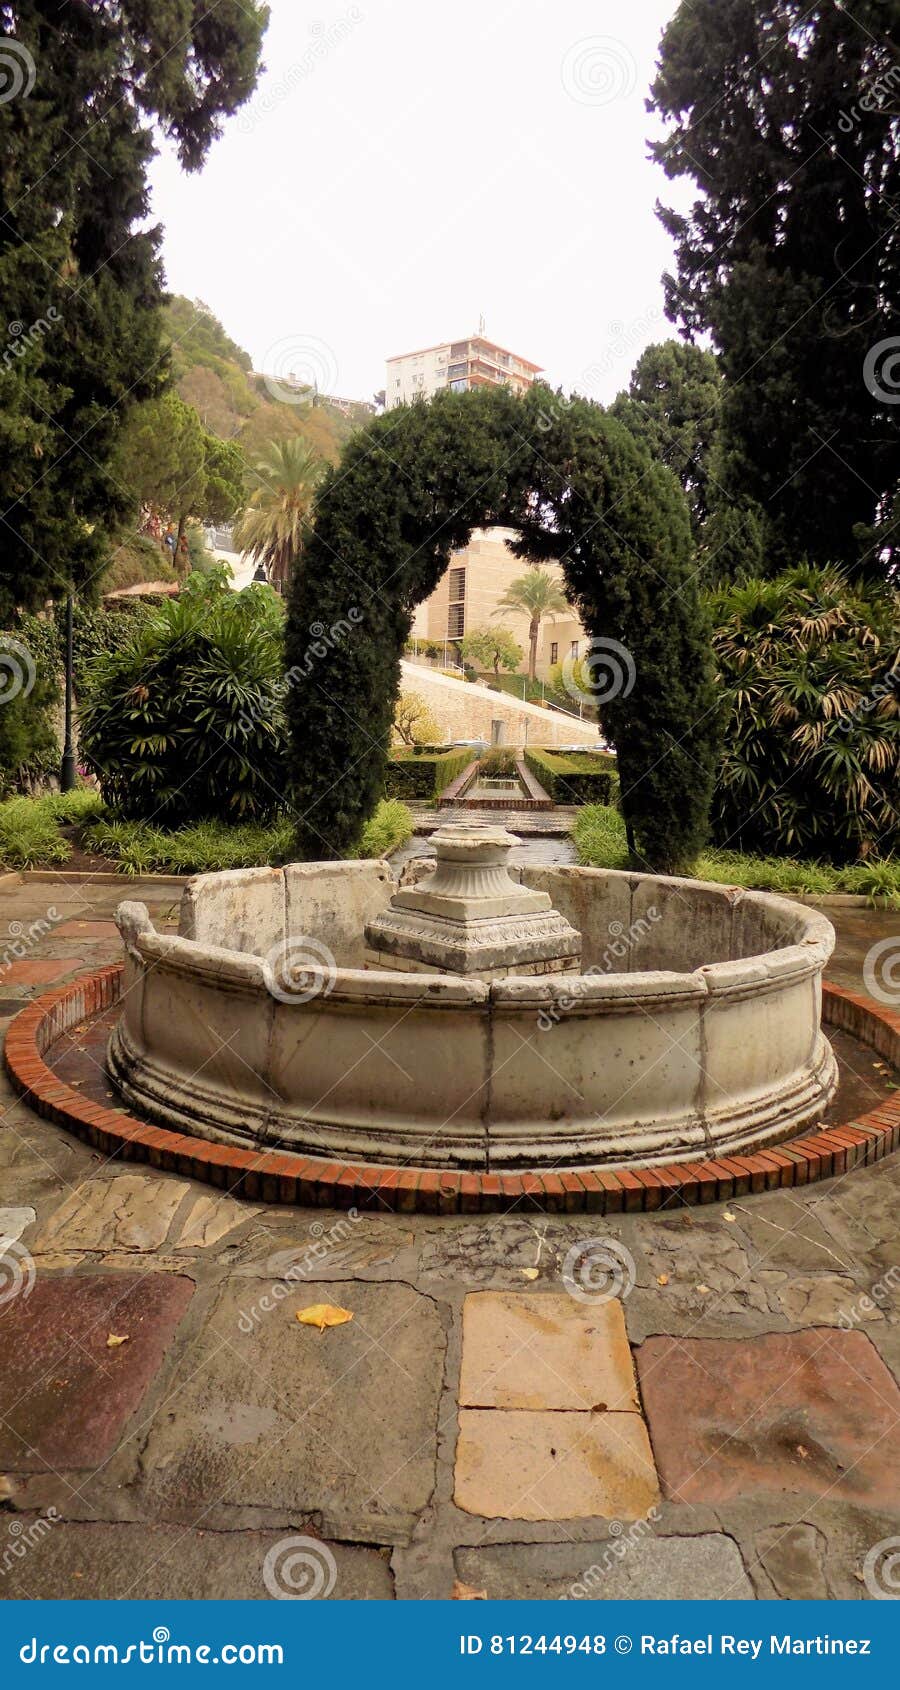 igardens of puerta oscura-park of malaga-